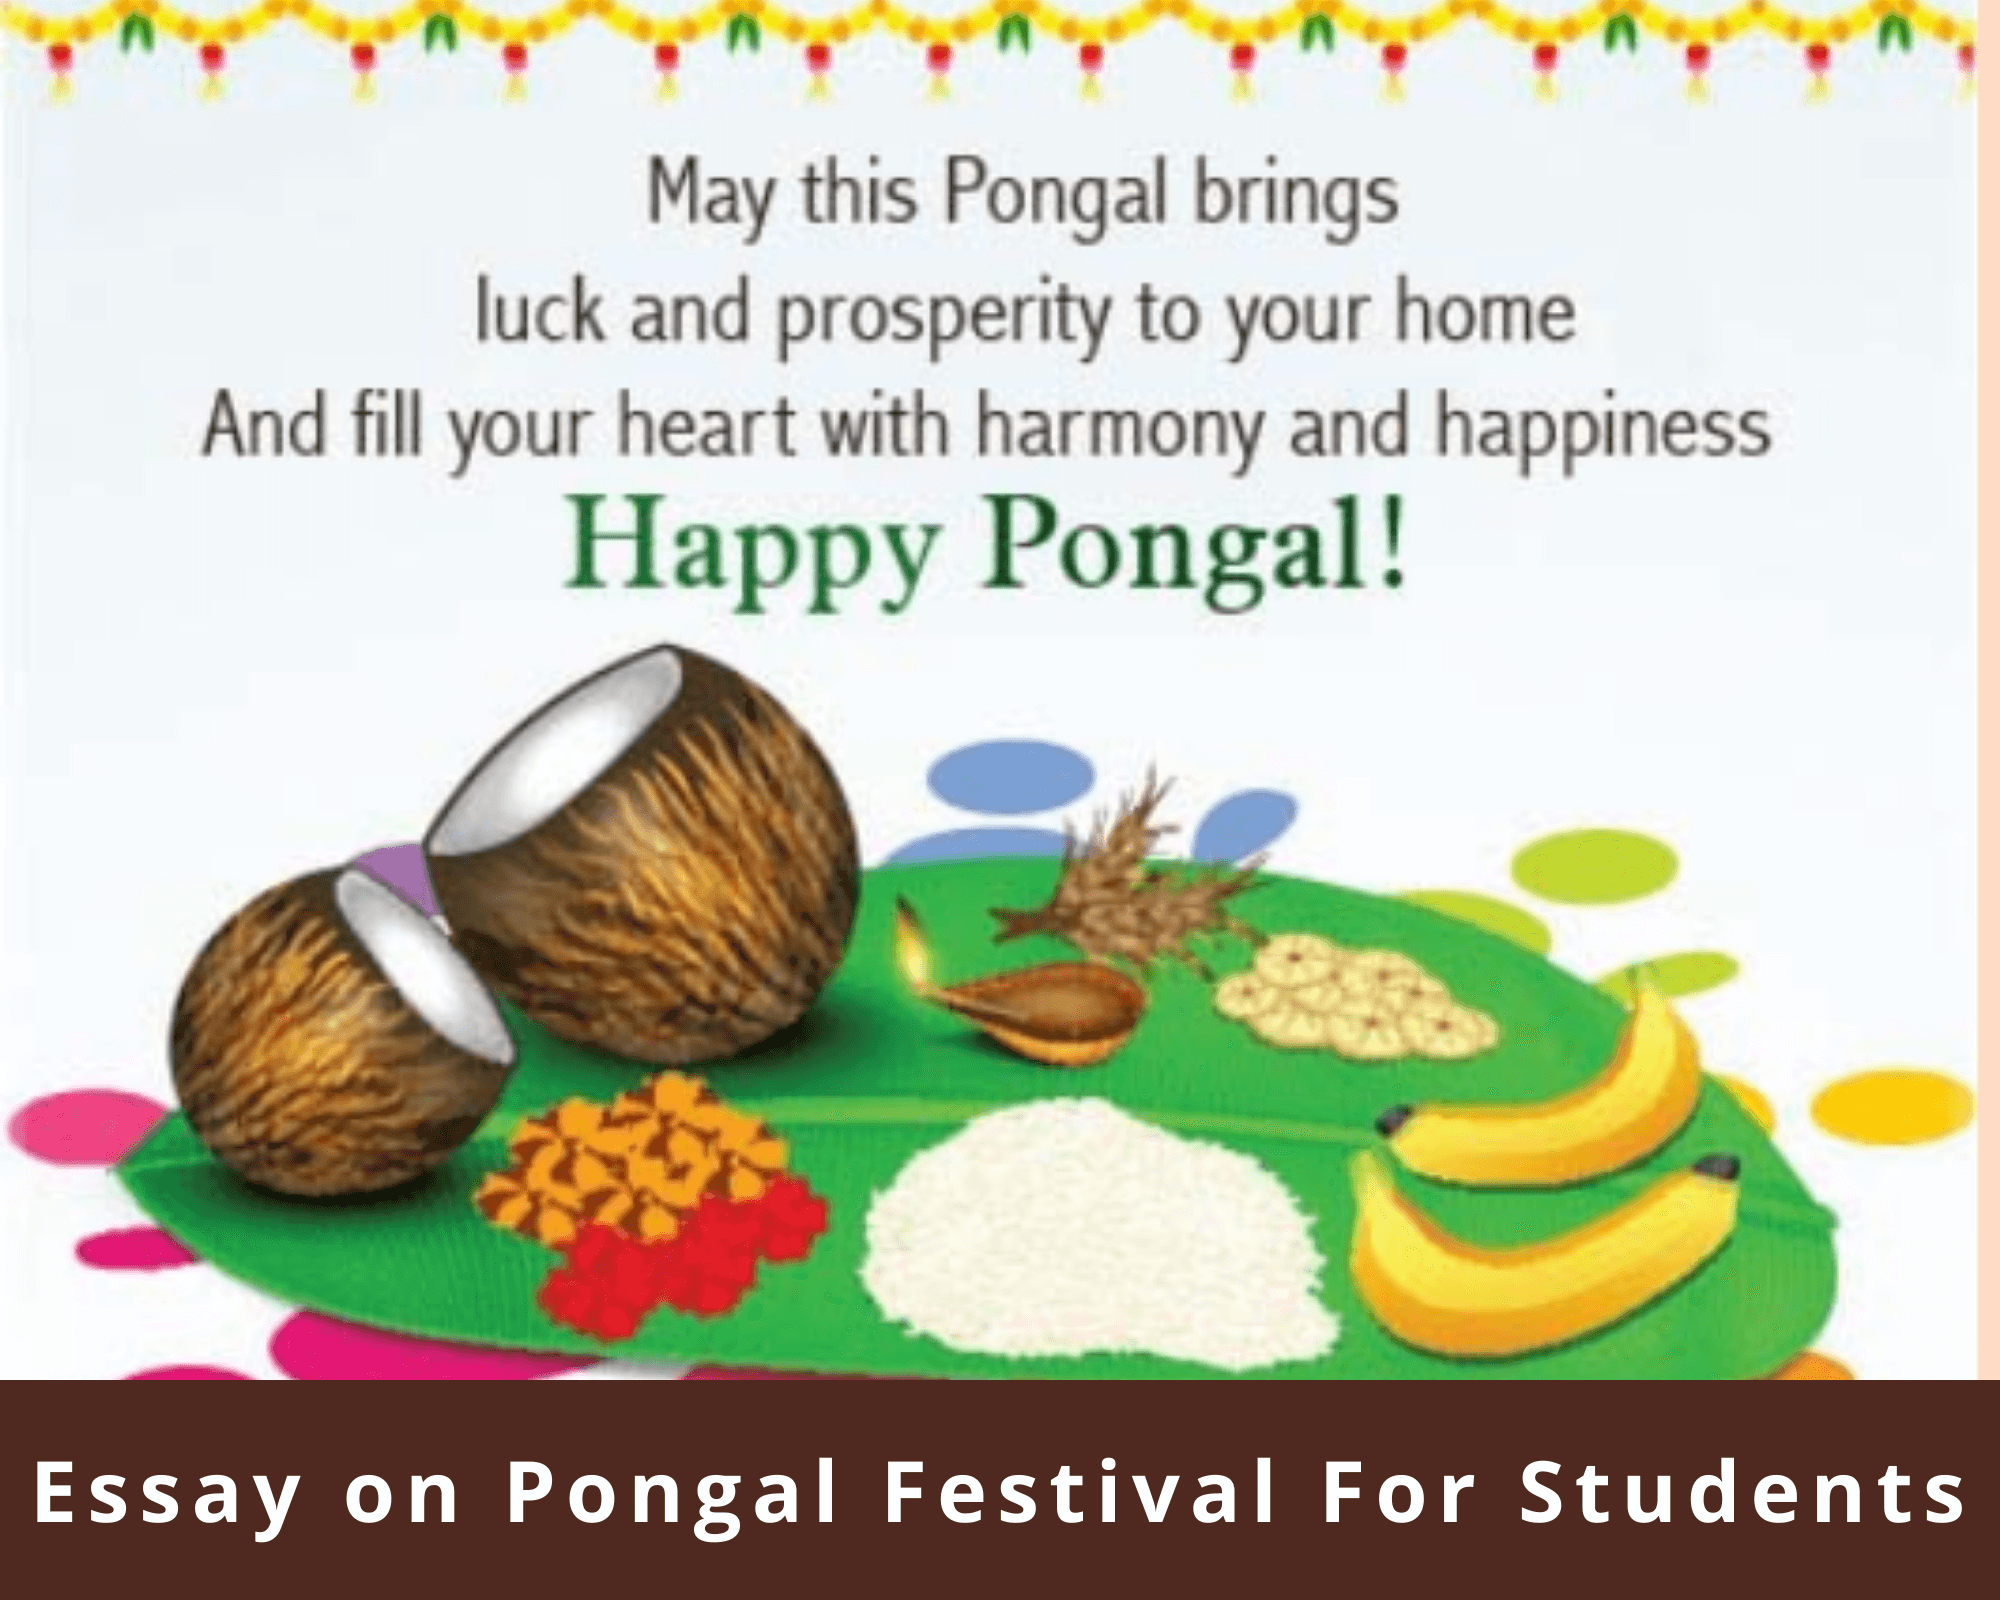 Essay on Pongal Festival | 10 Lines & More Sentences Essay For Students